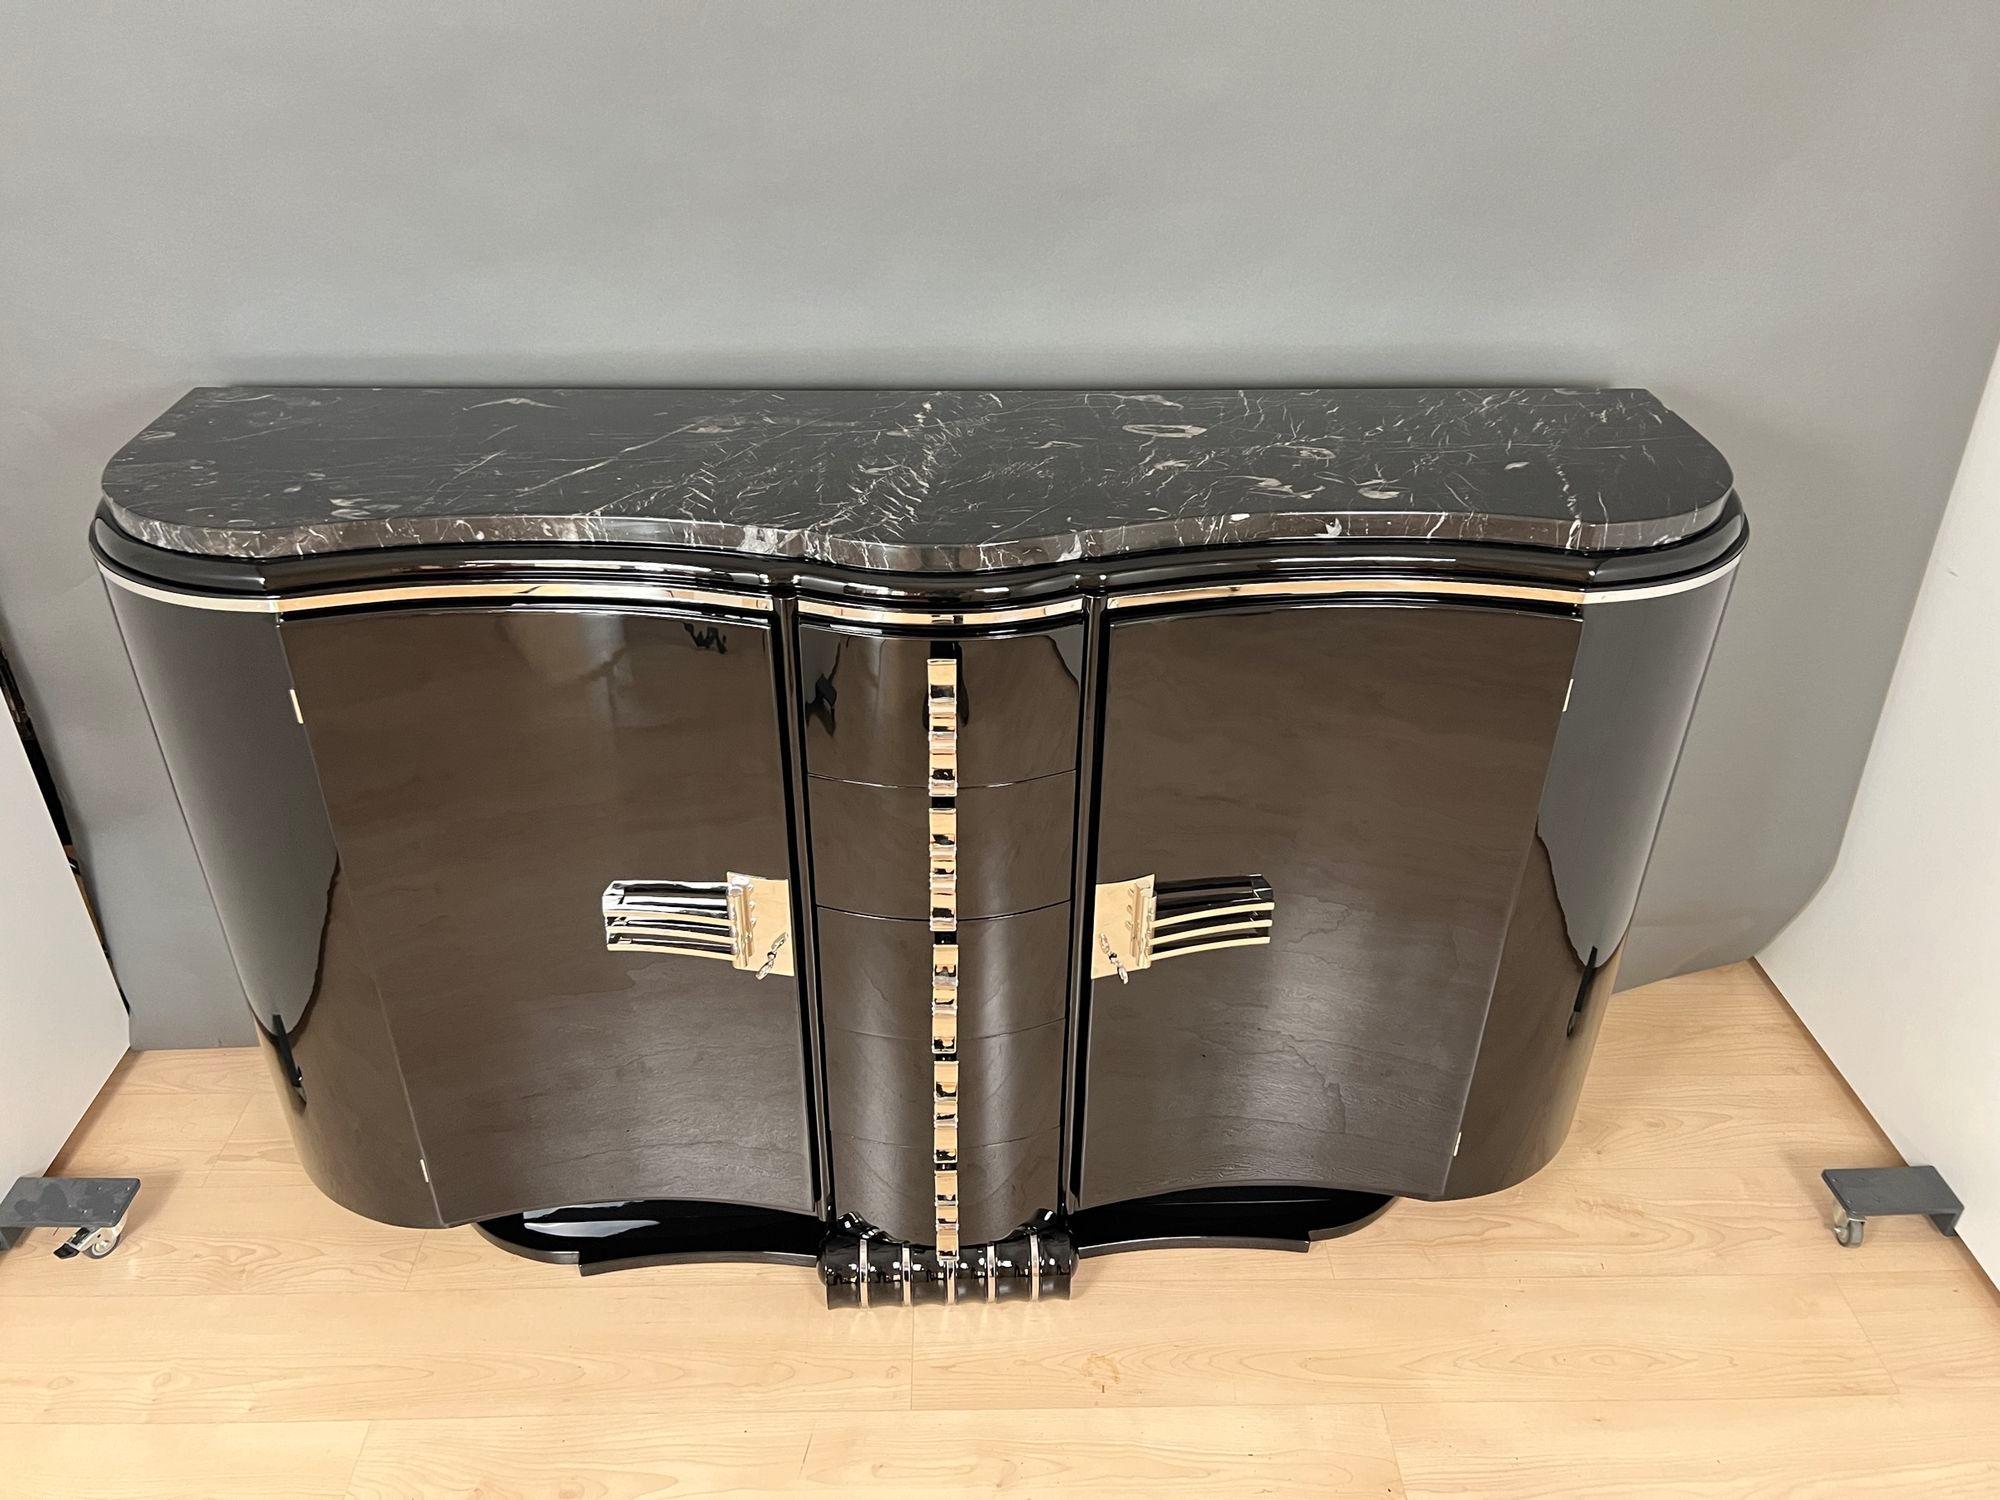 Large French Art Deco Sideboard or buffet from circa 1930. Fully restored, Black high gloss piano lacquer on wood. Elegantly curved art deco design. Top with original thick black marble top.
Original fittings, handles, hinges and locks. All metal